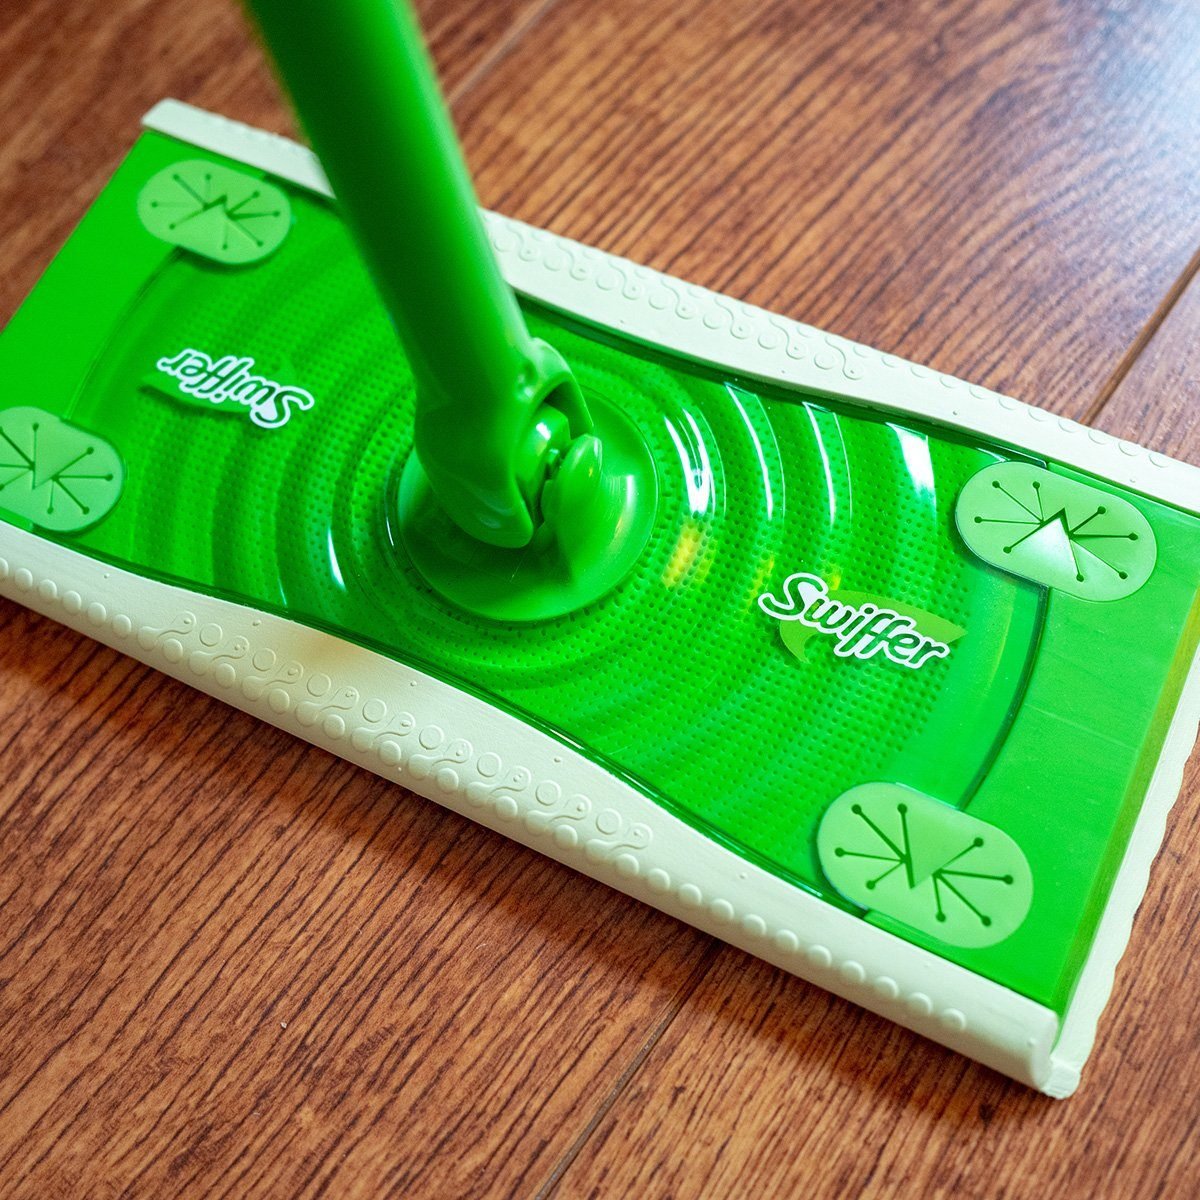 Clean With A Swiffer, Is The Swiffer Wet Jet Safe For Laminate Floors